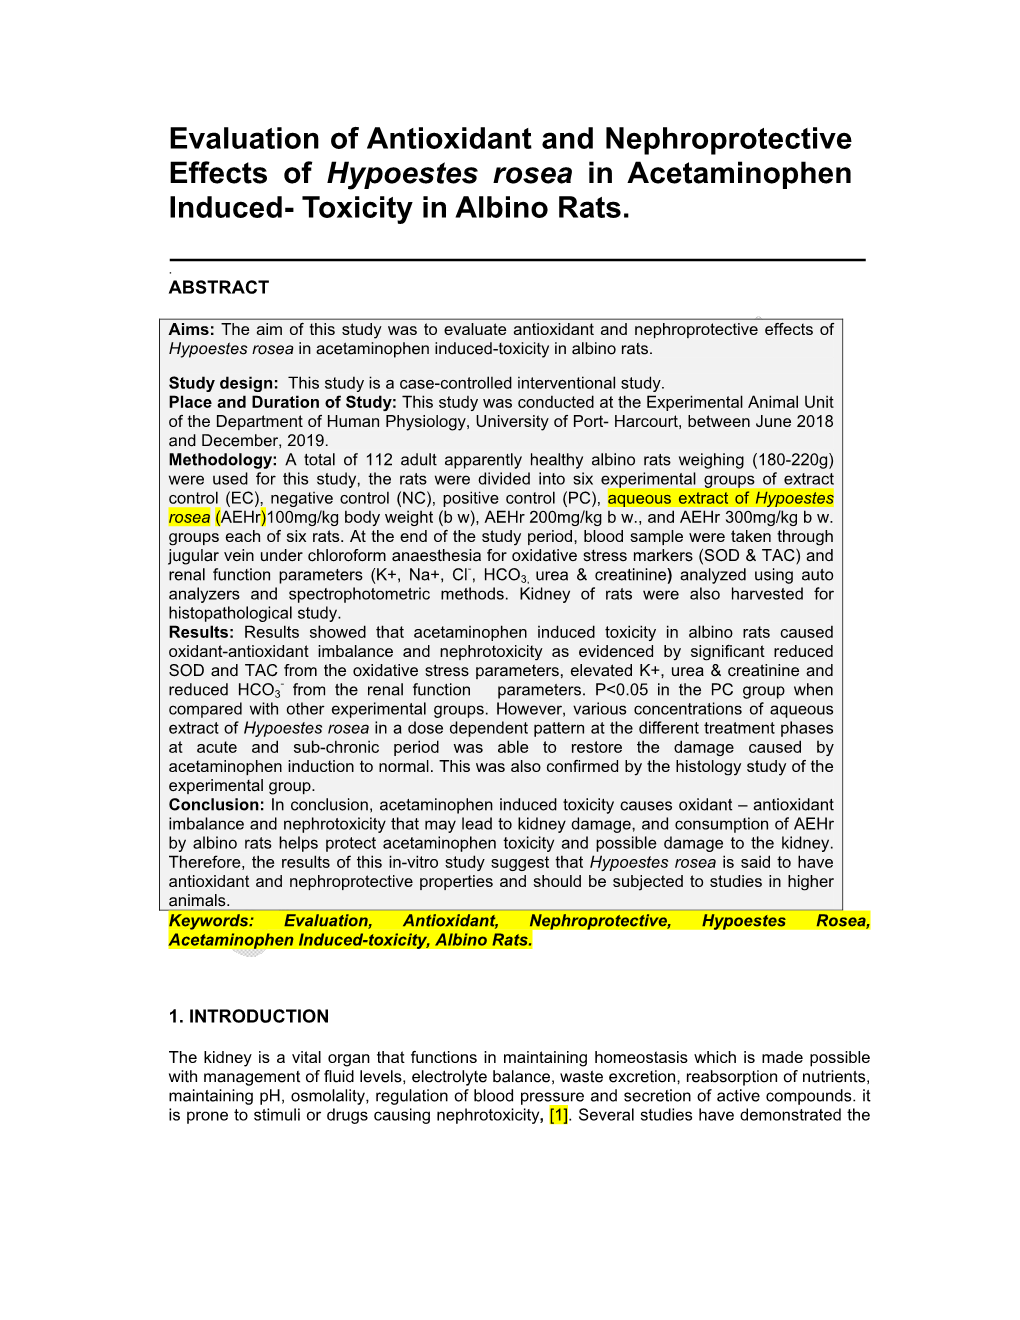 Evaluation of Antioxidant and Nephroprotective Effects of Hypoestes Rosea in Acetaminophen Induced- Toxicity in Albino Rats